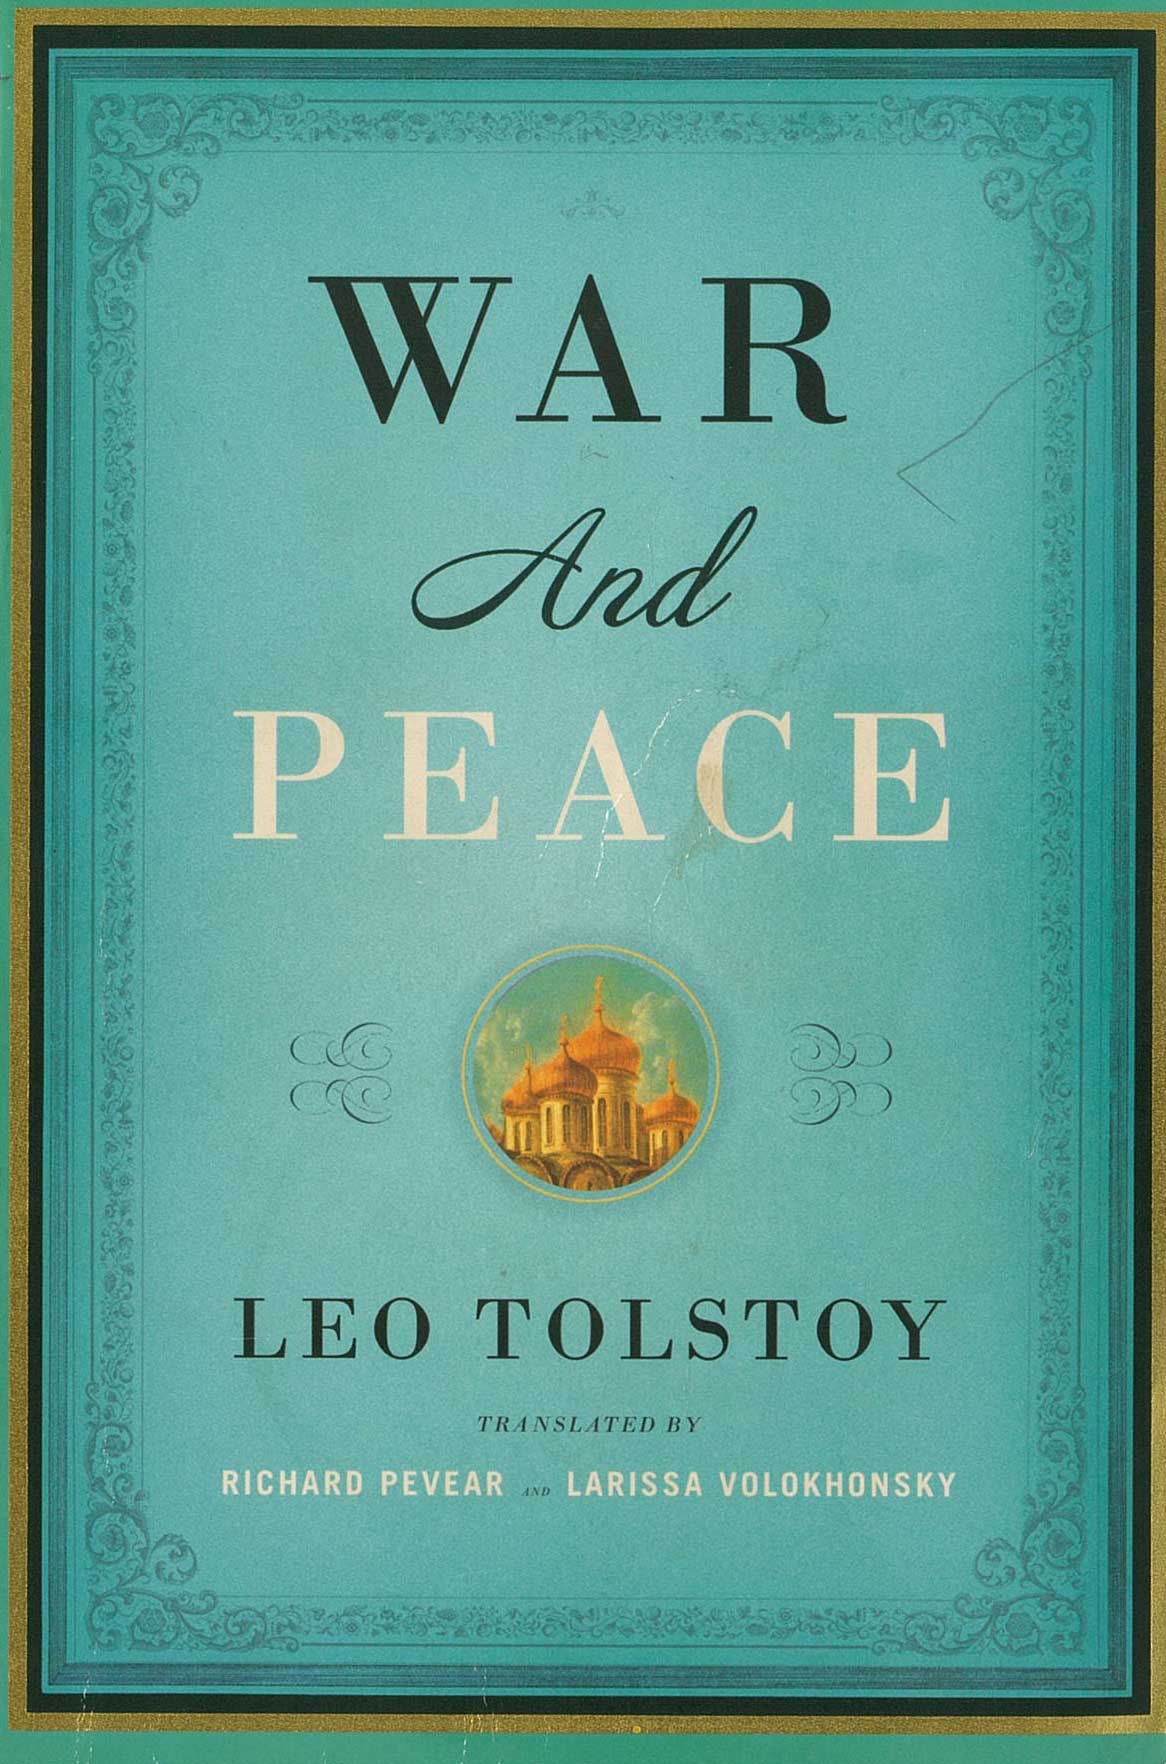 War and peace characters pdf